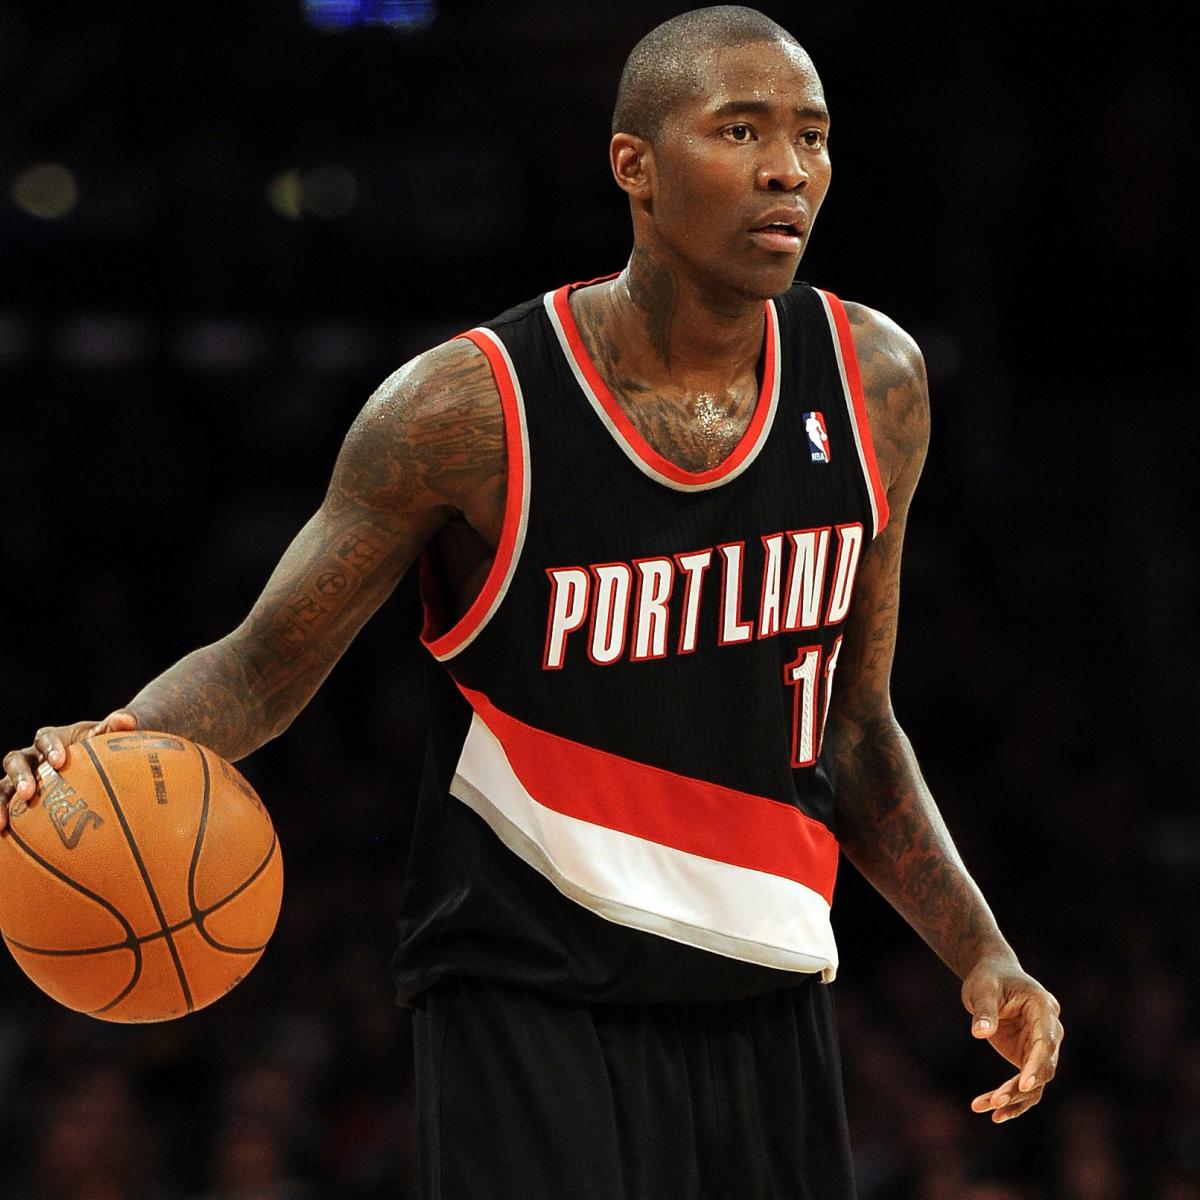 Blazers not his 'old team,' but Clippers' Crawford looks forward